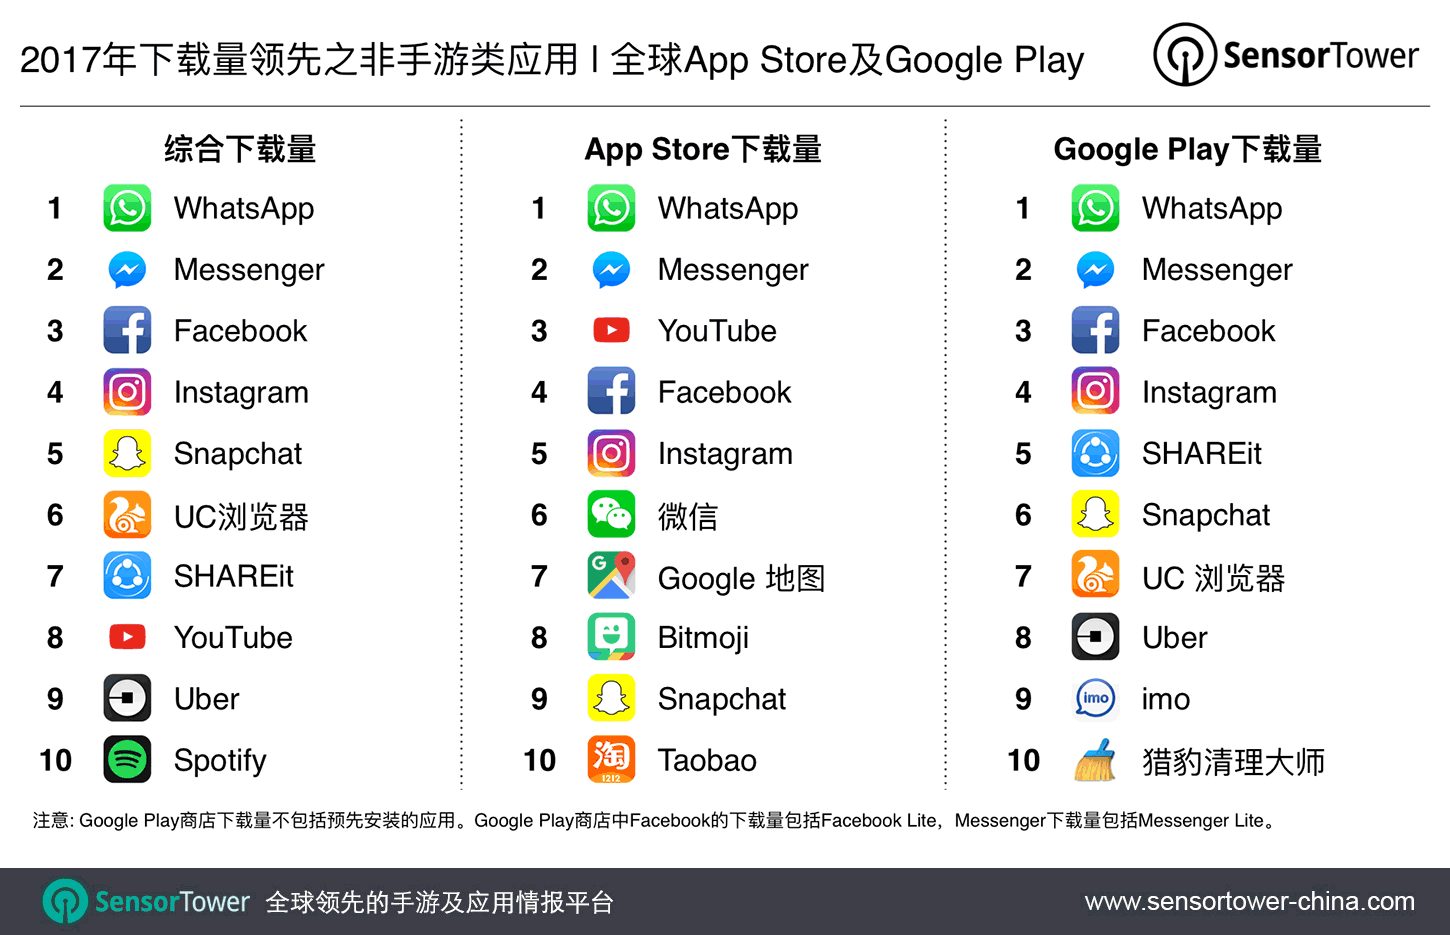 2017's Top Mobile Apps by Downloads CN